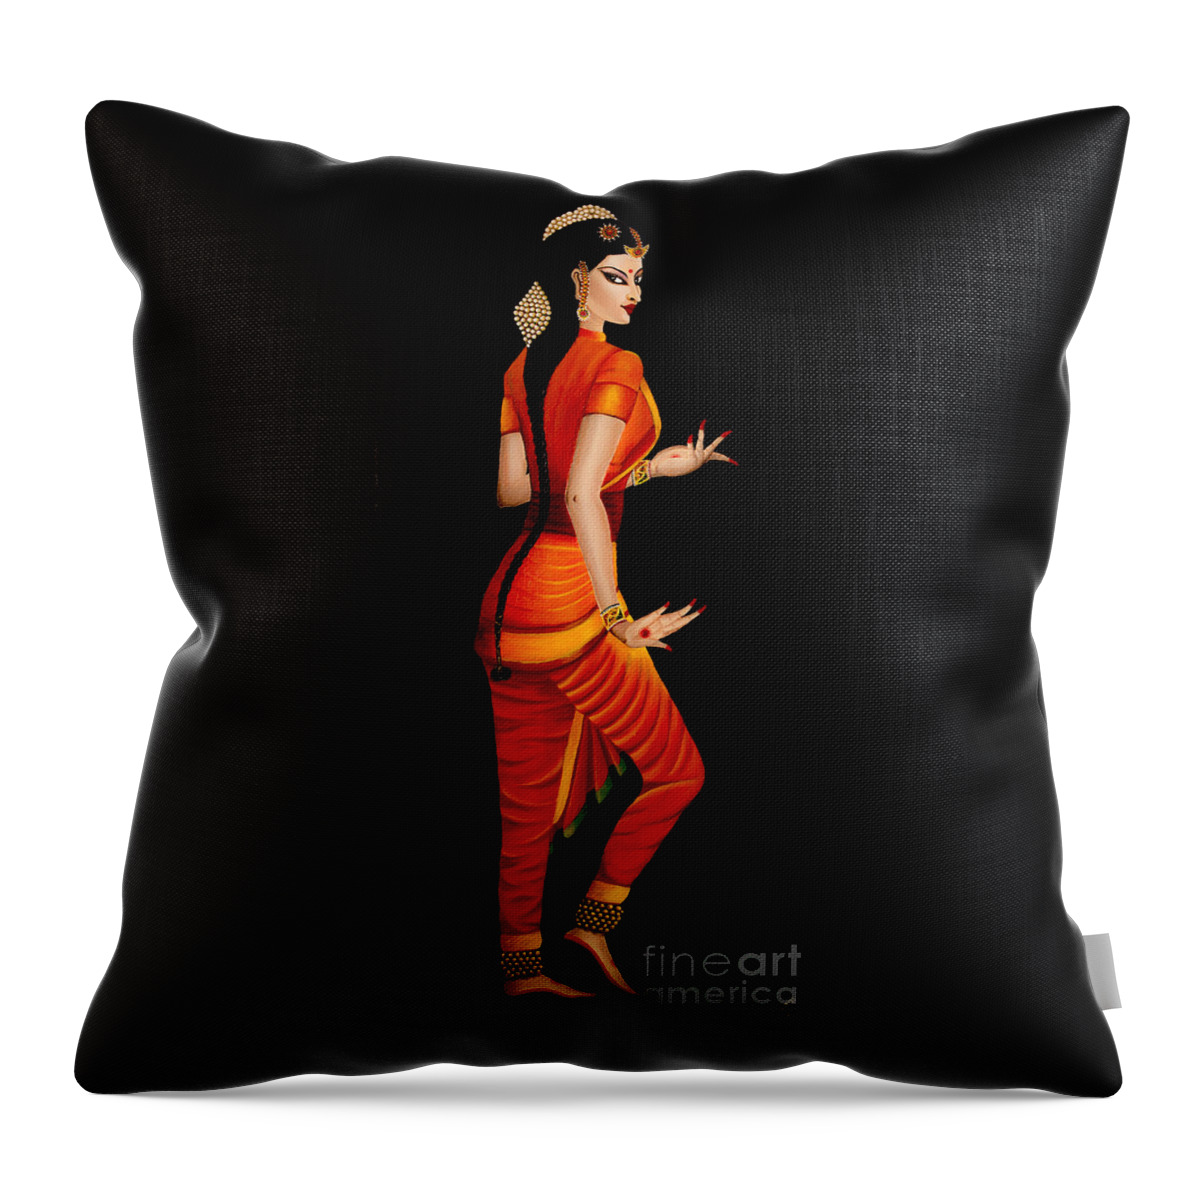 Painting Throw Pillow featuring the painting The Elegance by Sudakshina Bhattacharya